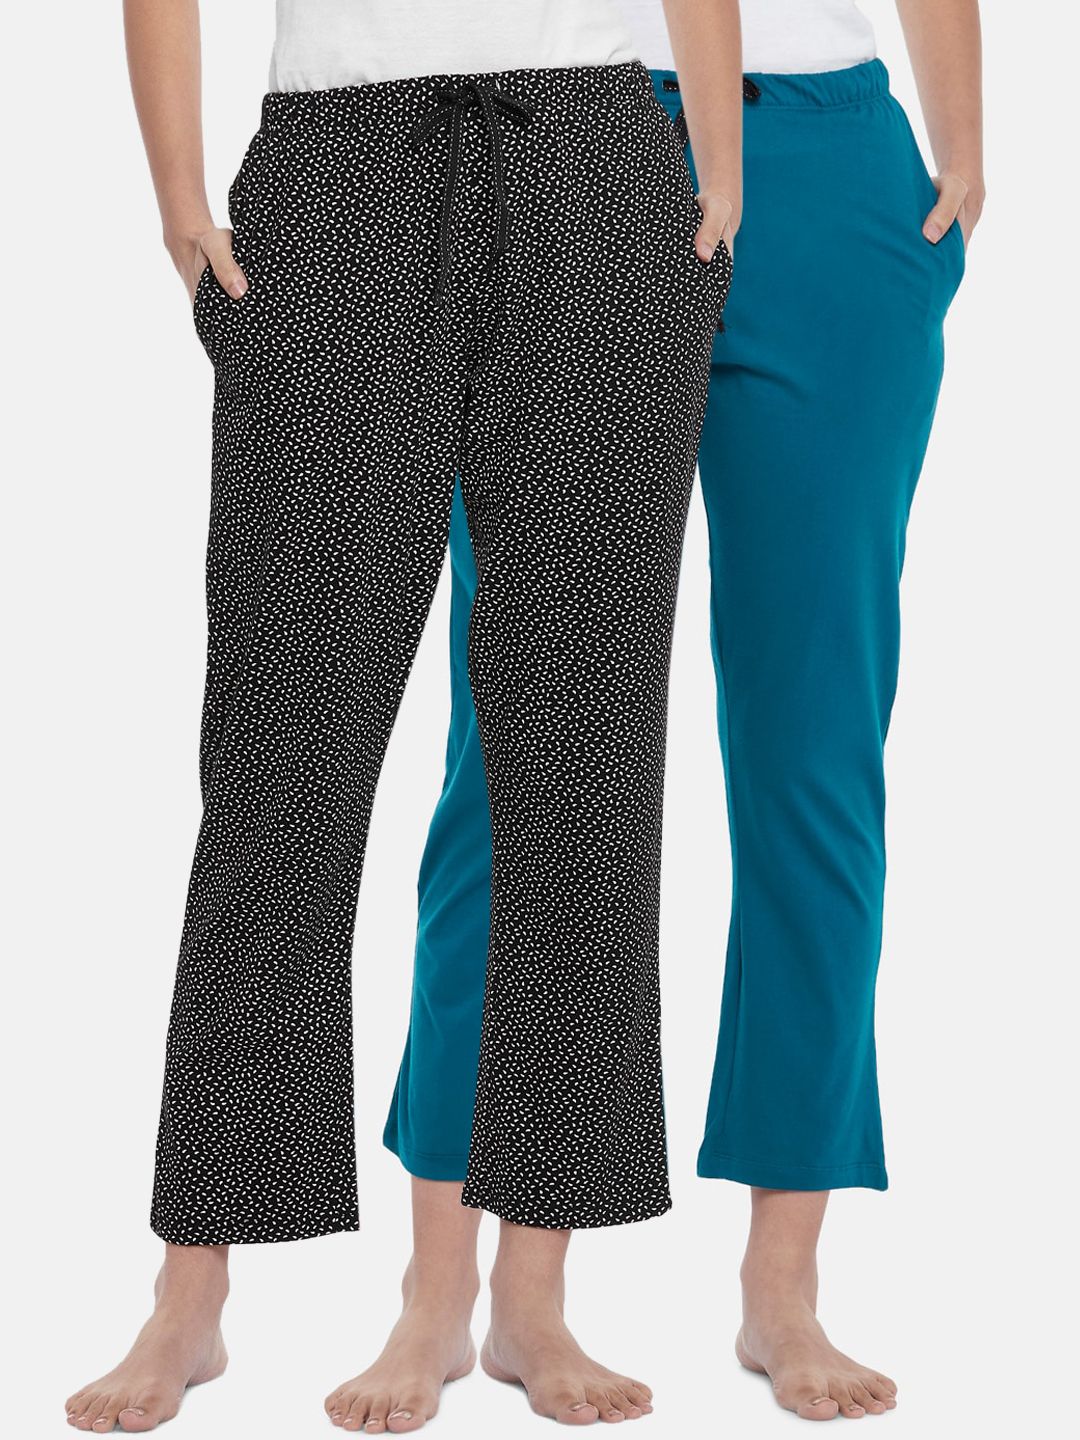 Dreamz by Pantaloons Women Pack of 2 Black & Blue Printed Cotton Lounge Pants Price in India